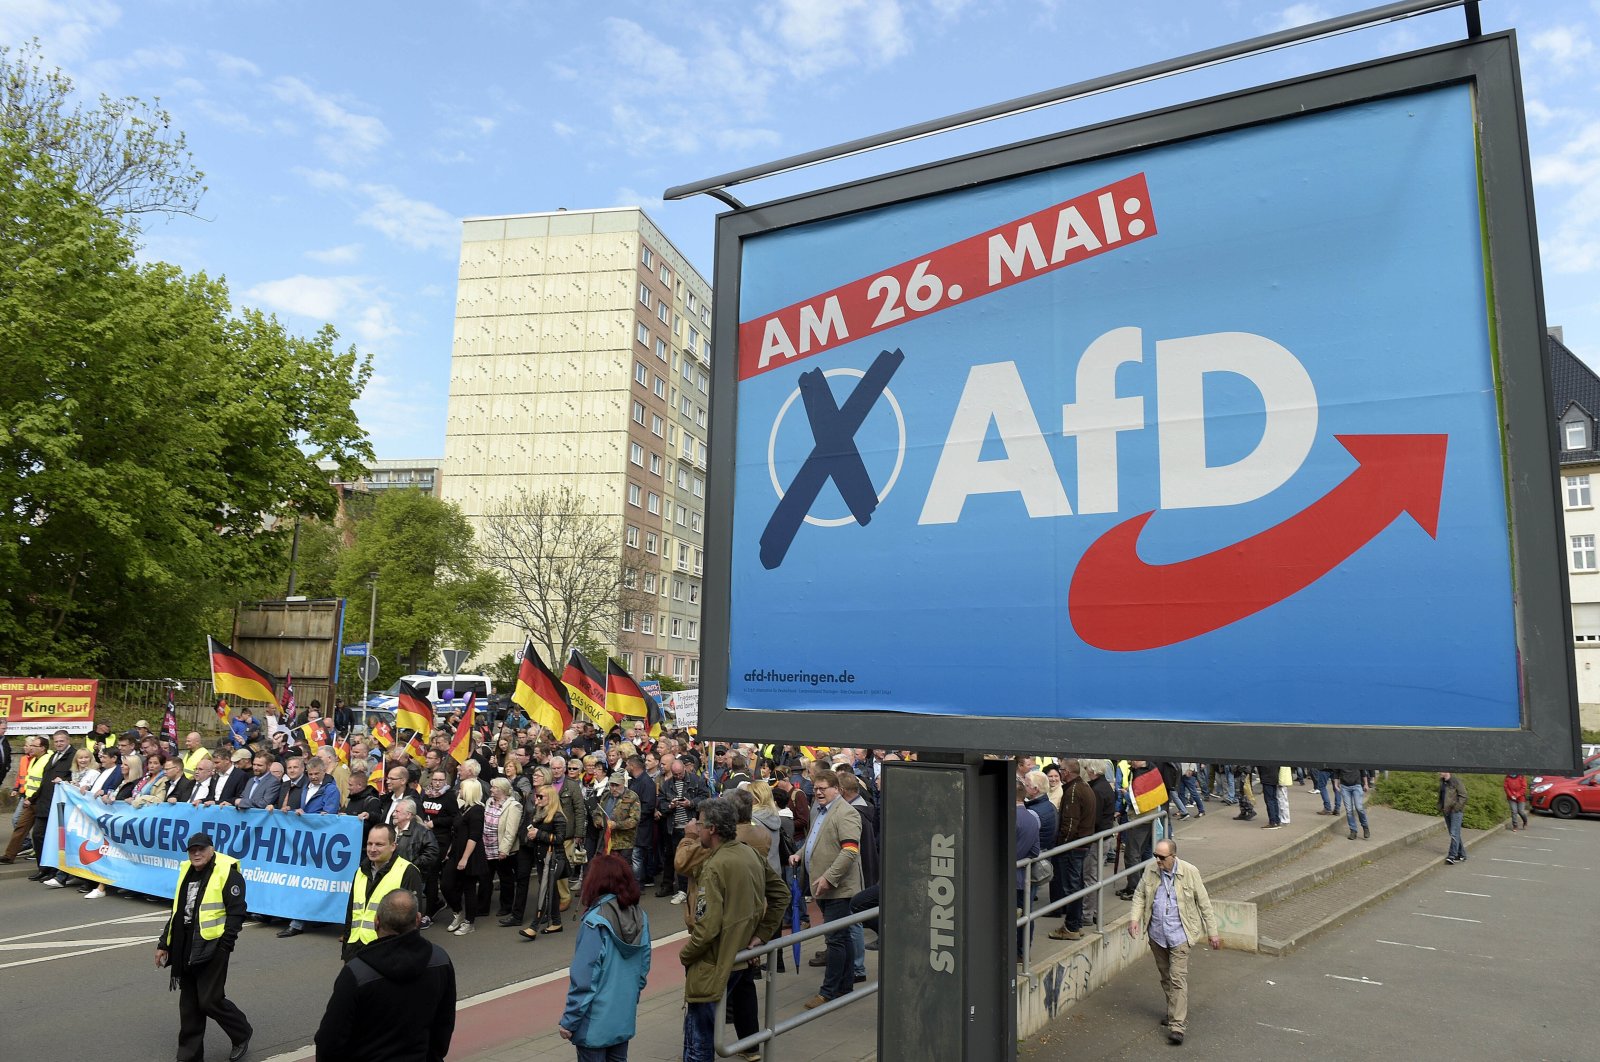 German far-right party AfD hits all-time-high 22% approval rating